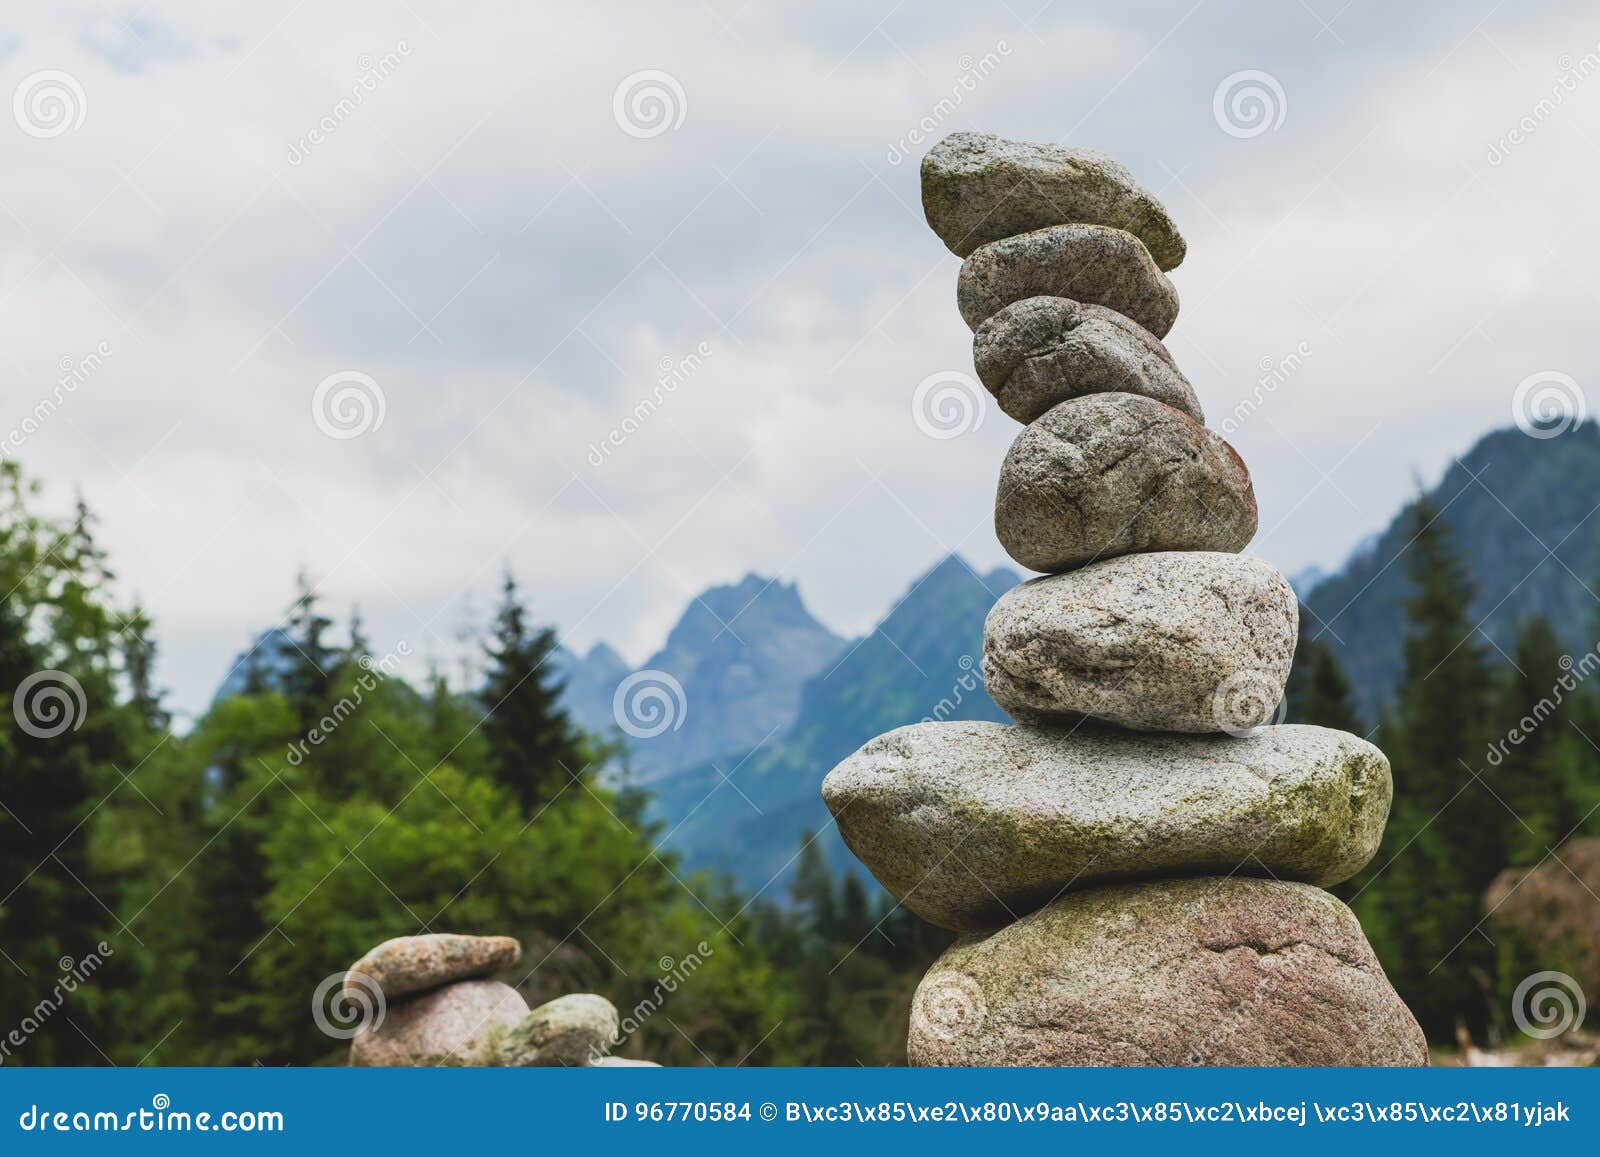 stones balance, inspiring stability concept on rocks in mountain